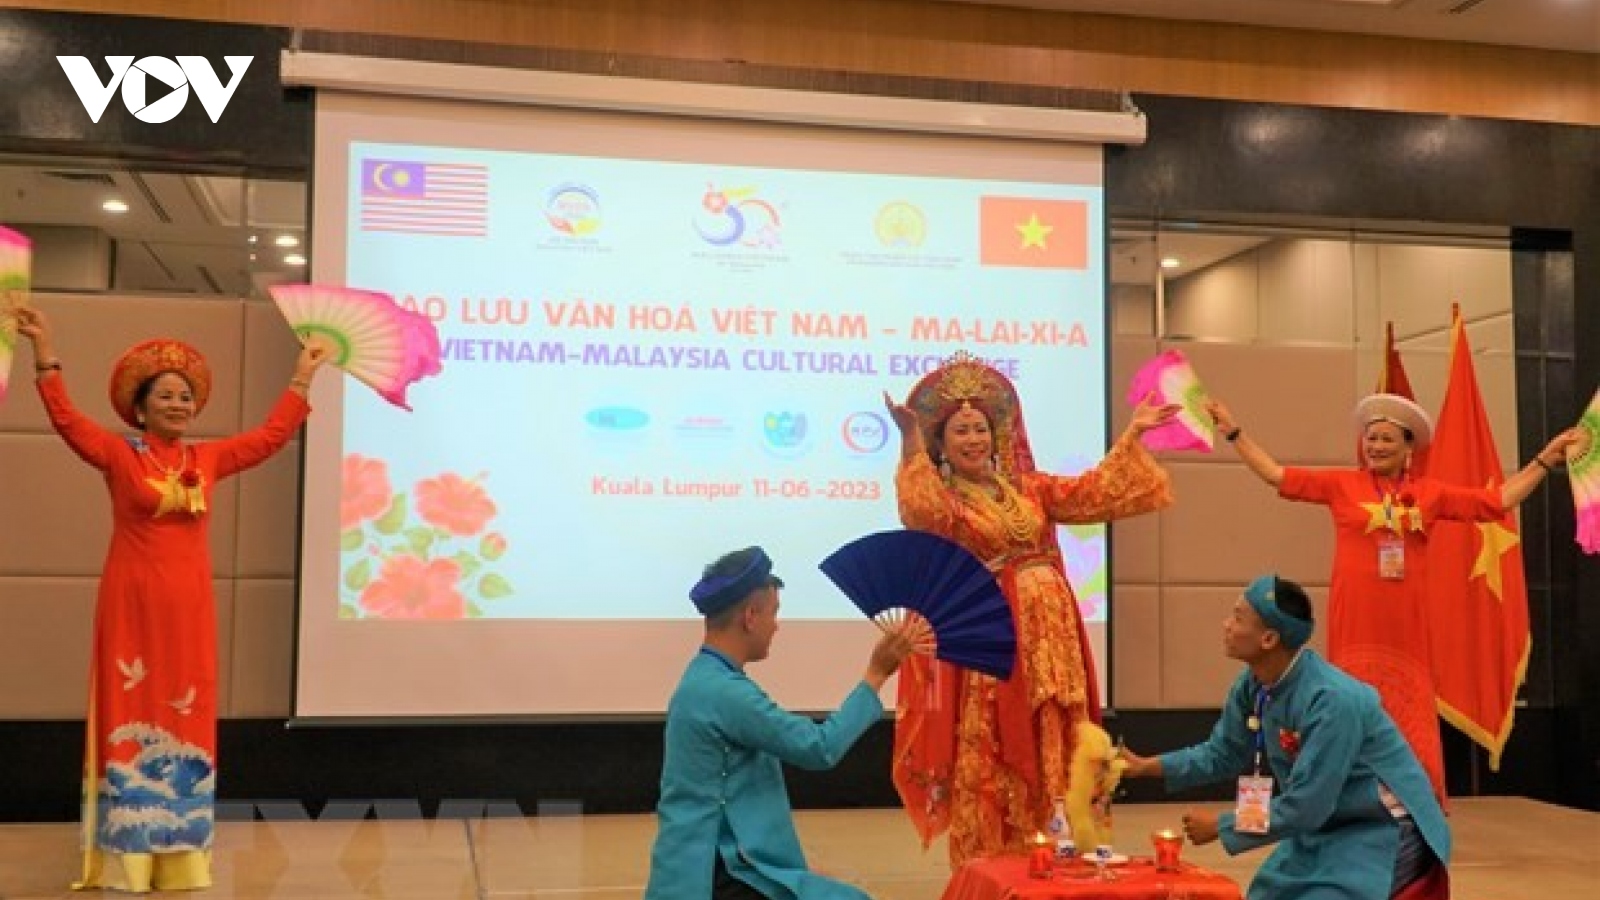 Vietnamese images promoted via cultural diplomacy in Malaysia